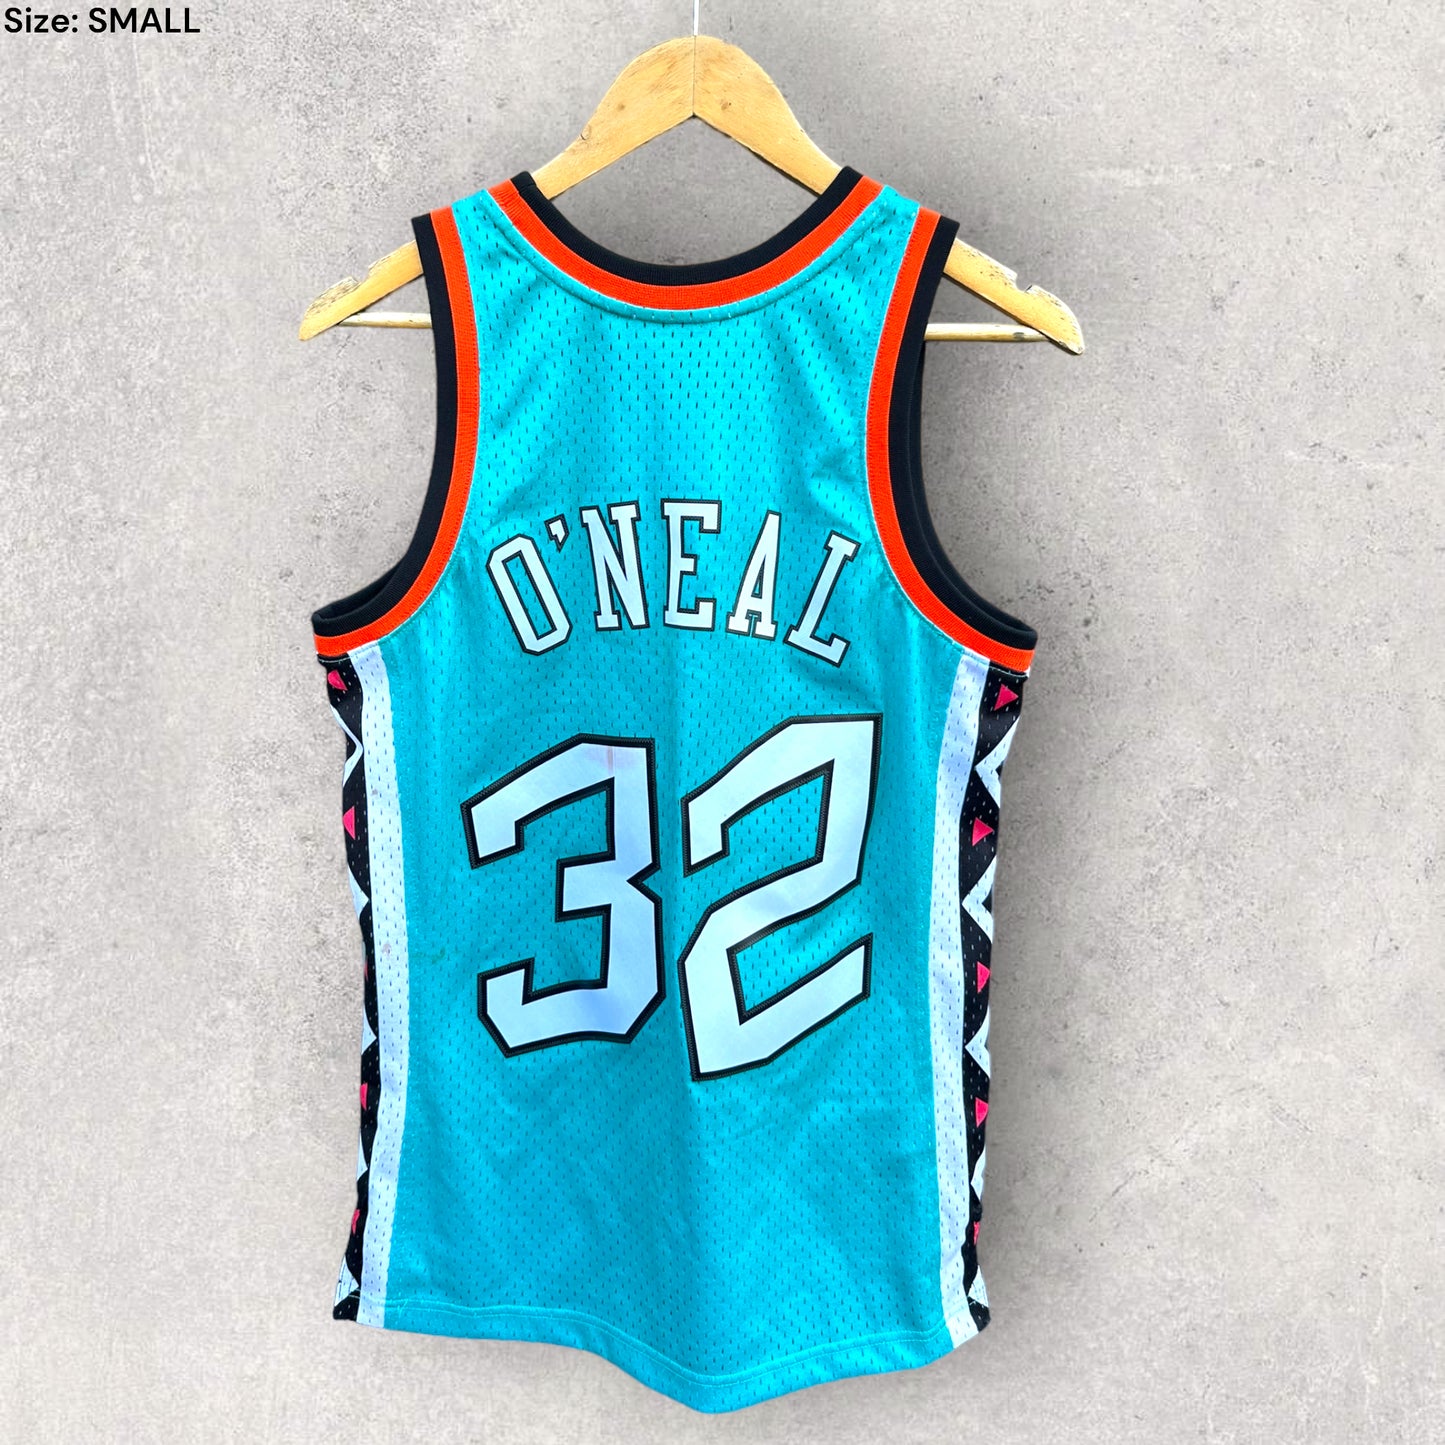 SHAQUILLE O’NEAL NBA ALL STAR HARDWOOD JERSEY BRAND NEW WITH TAGS